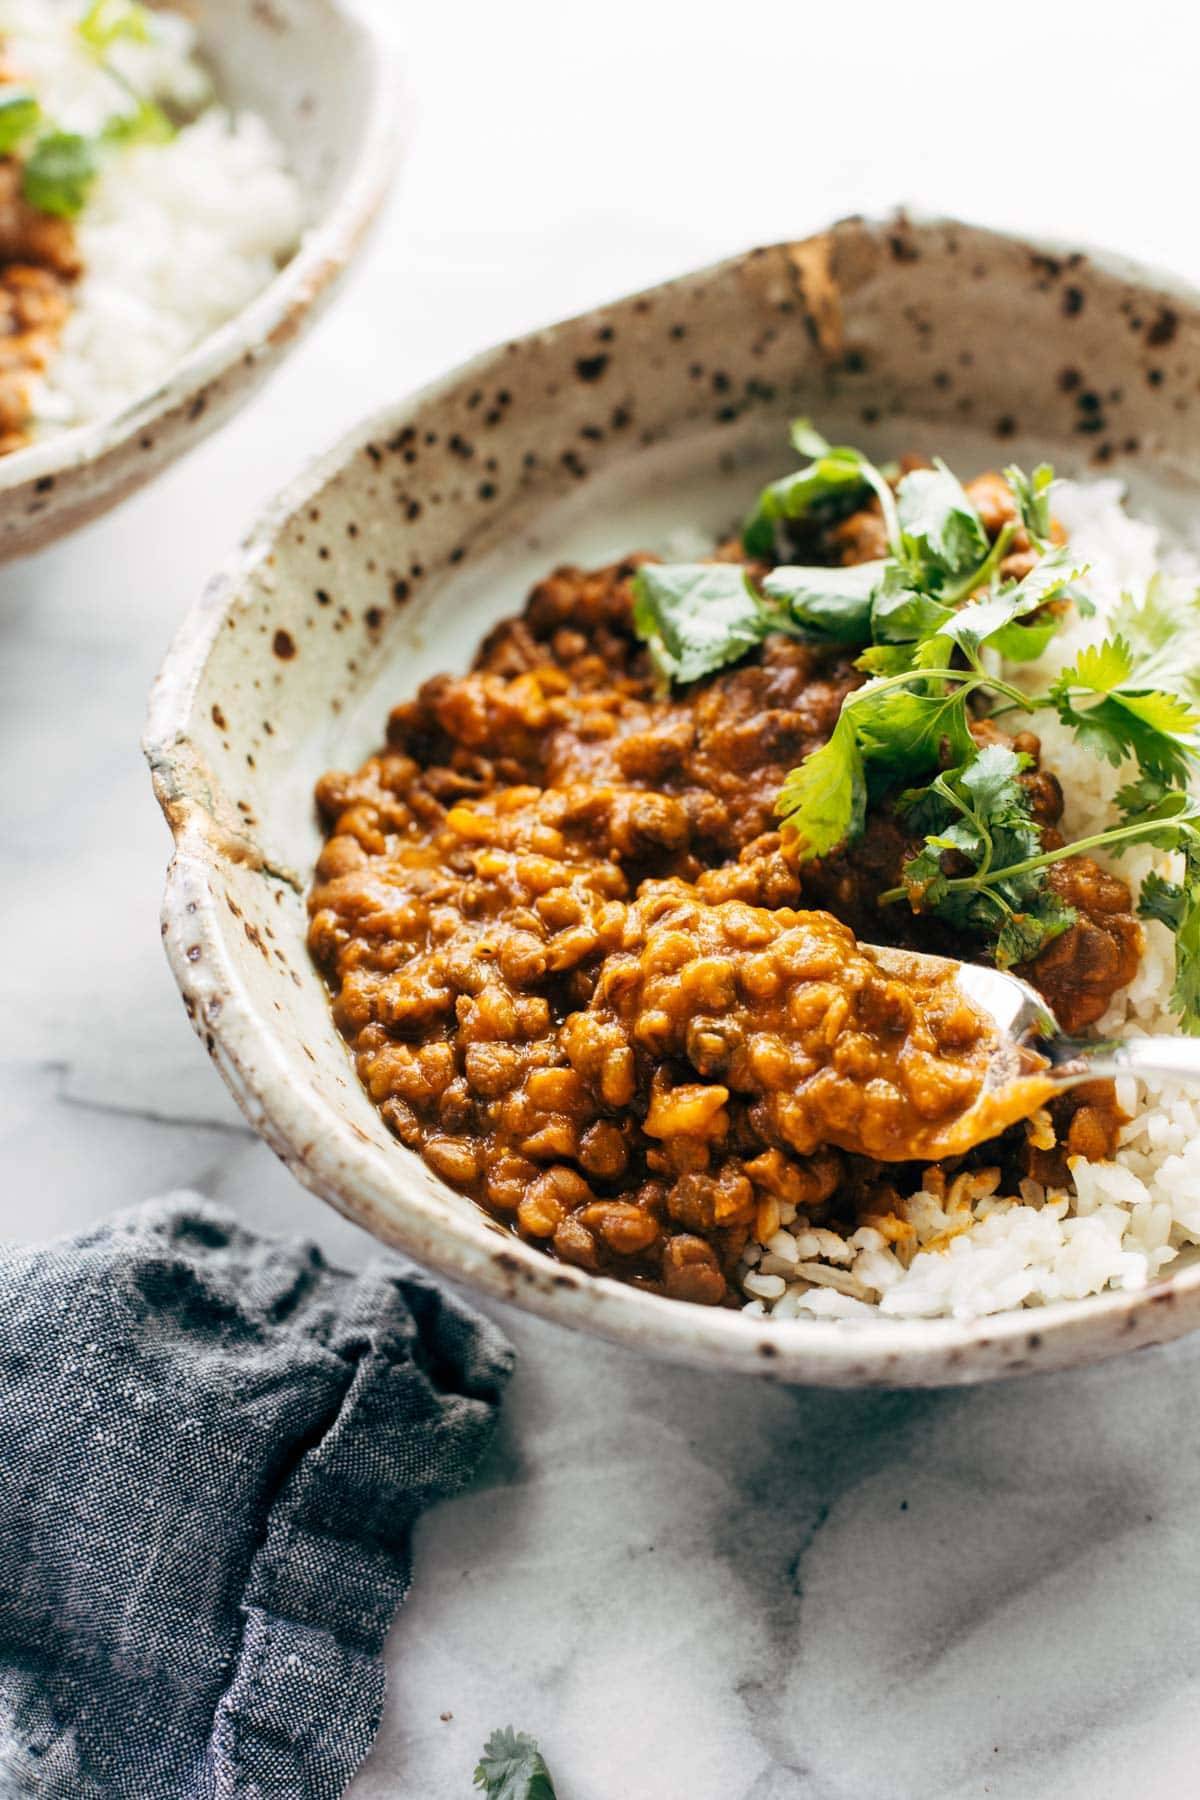 Red curry lentils in a bowl with rice.